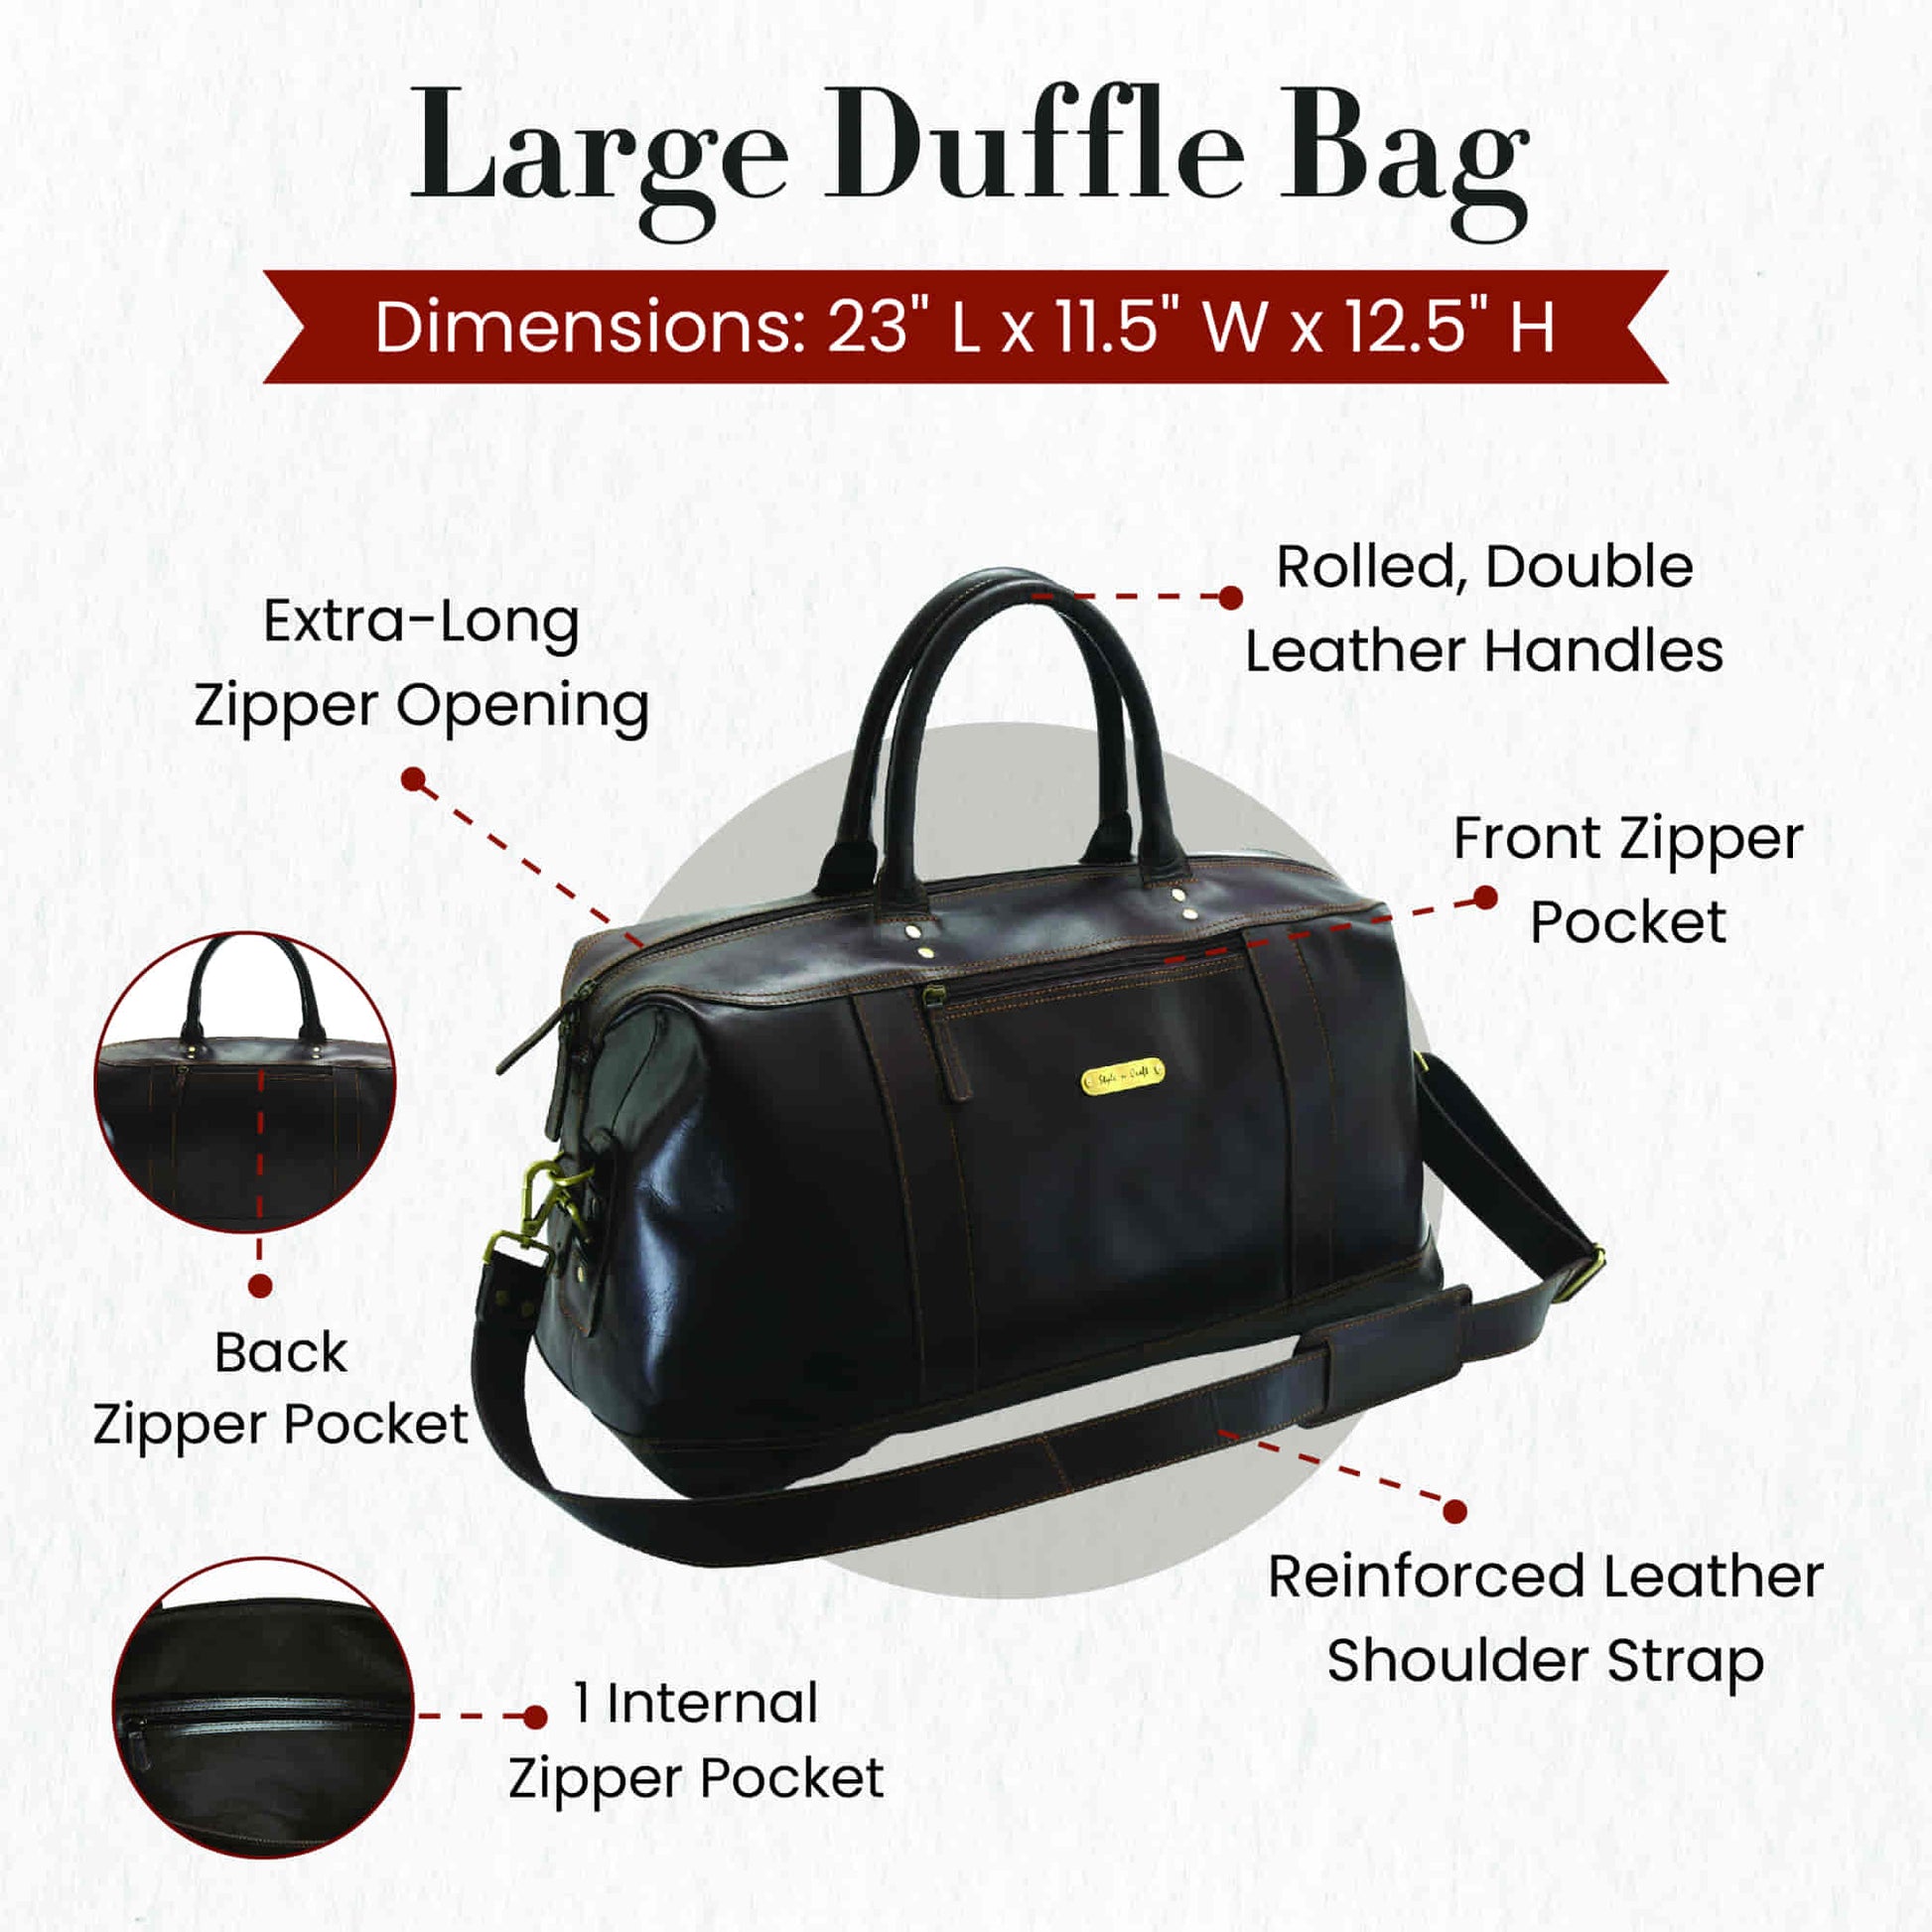 Style n Craft 392100 Large Duffle Bag in Full Grain Dark Brown Leather - Front Angled View Showing Details